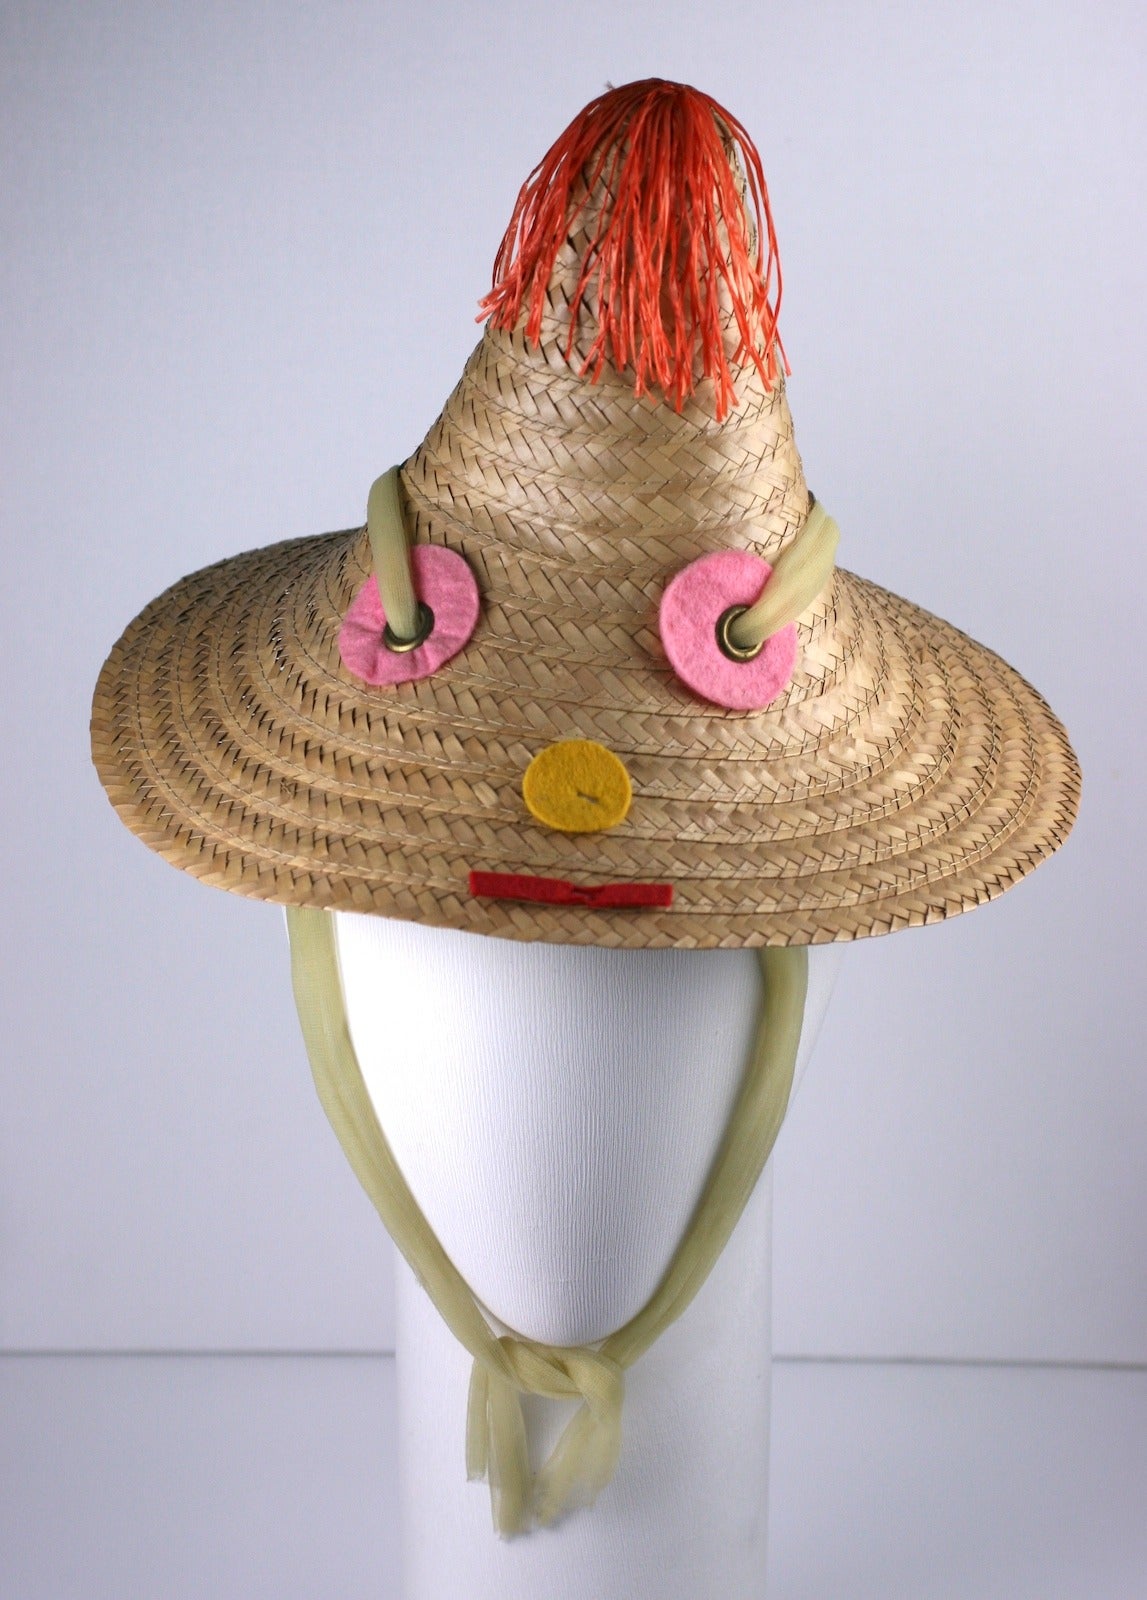 Simple, childlike and charming Italian straw hat from the 1950's when people actually 